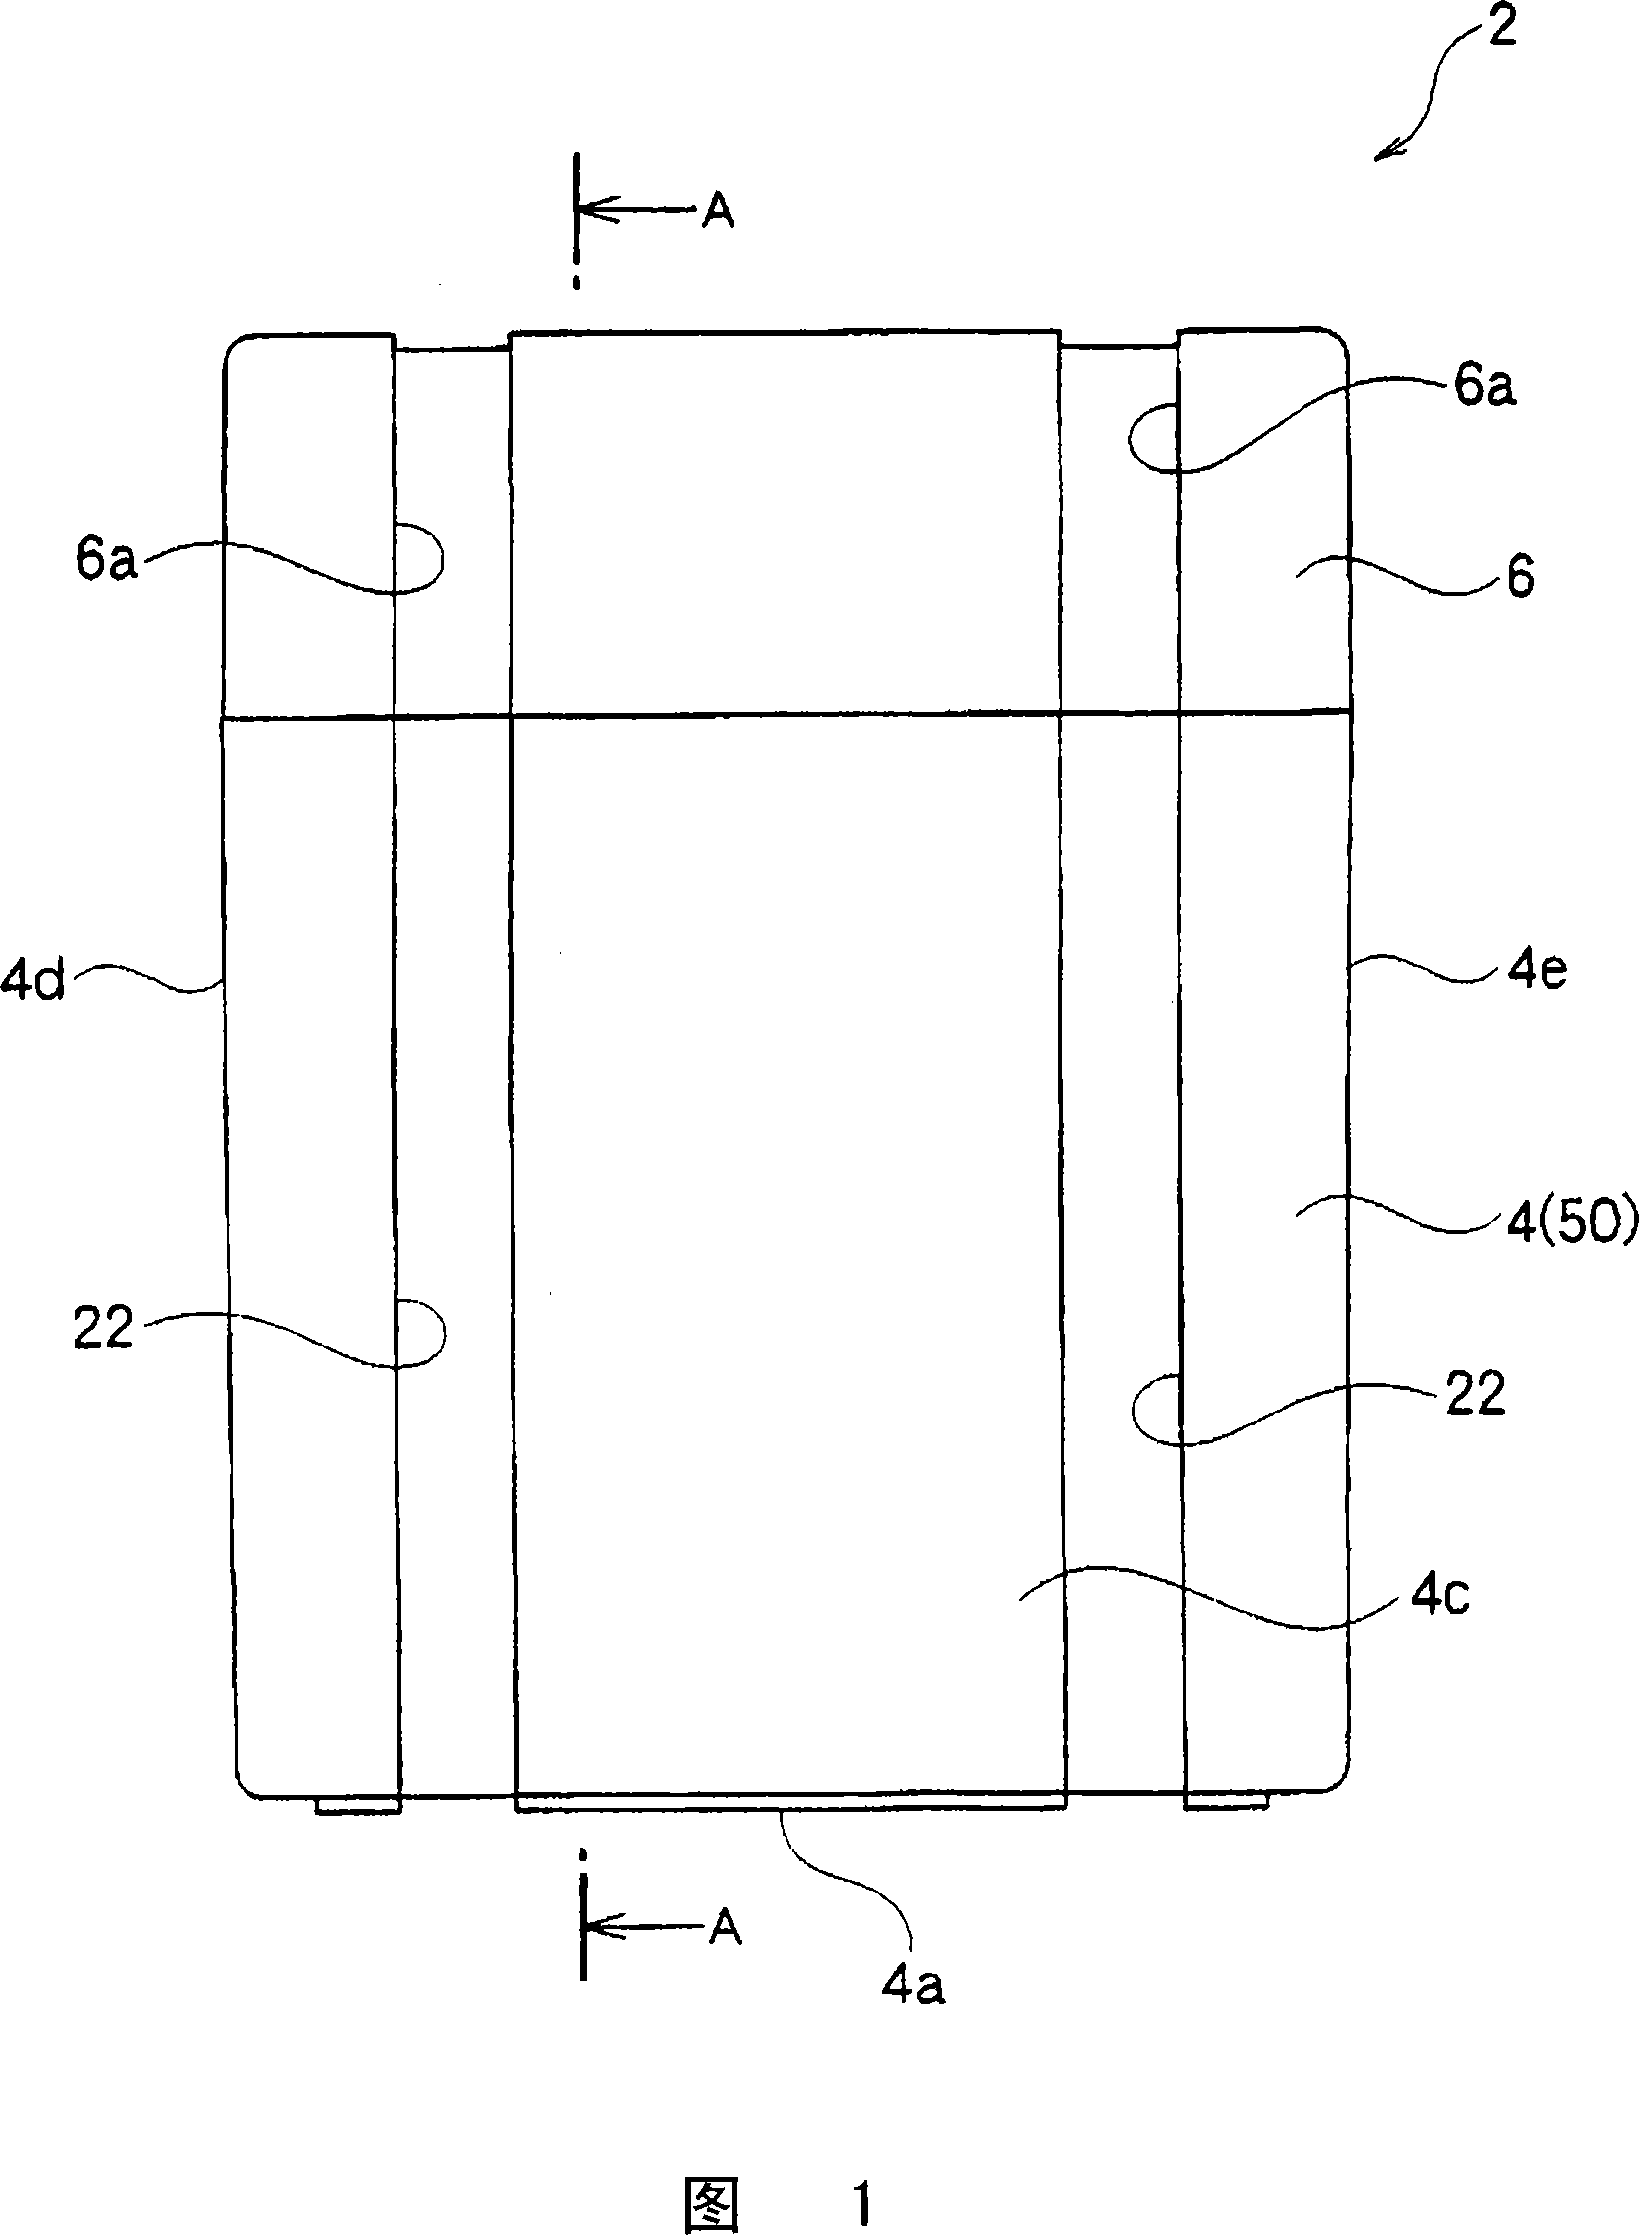 Container for conveying substrate, inner wall structure of the container, and bottom raising member used for the container